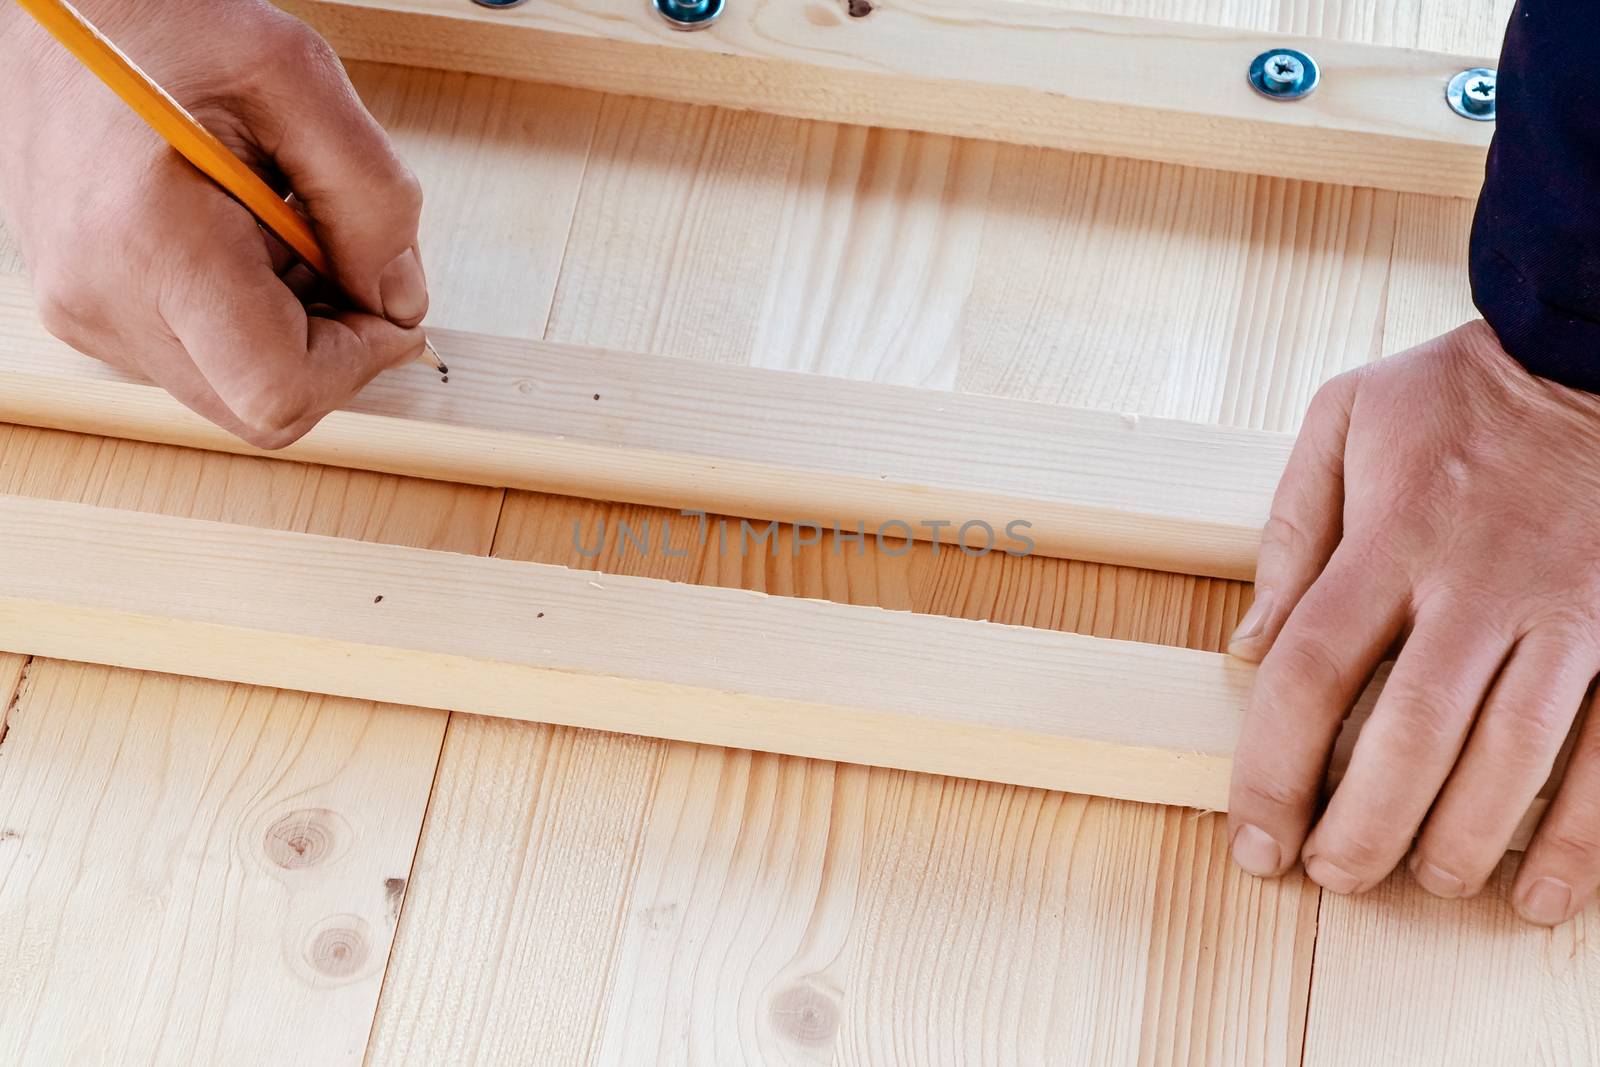 Male hands are marking boards for drilling holes for screws.